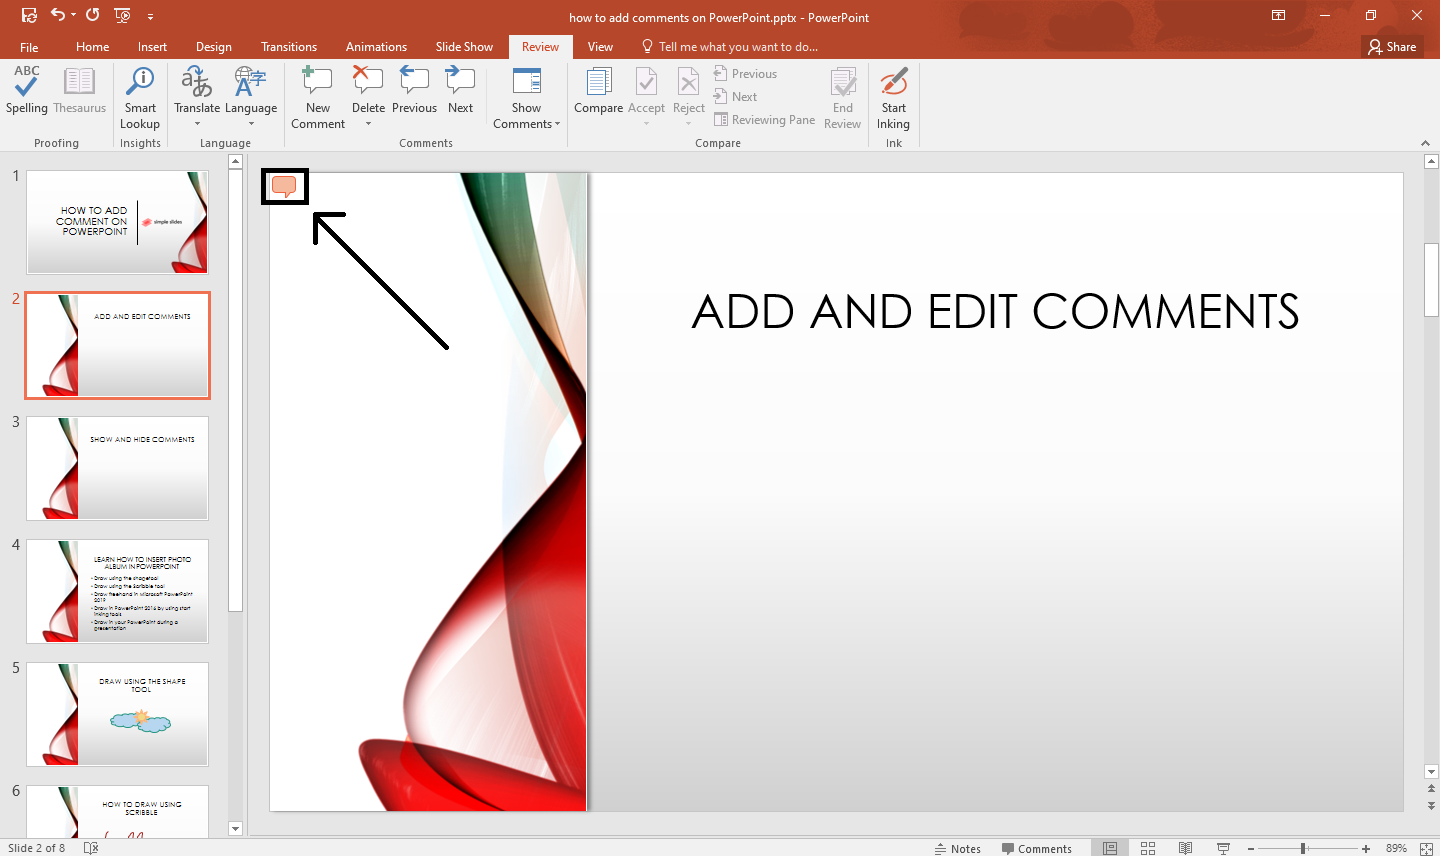 Click the comment icon on your PowerPoint slide to view comments you wish to edit.